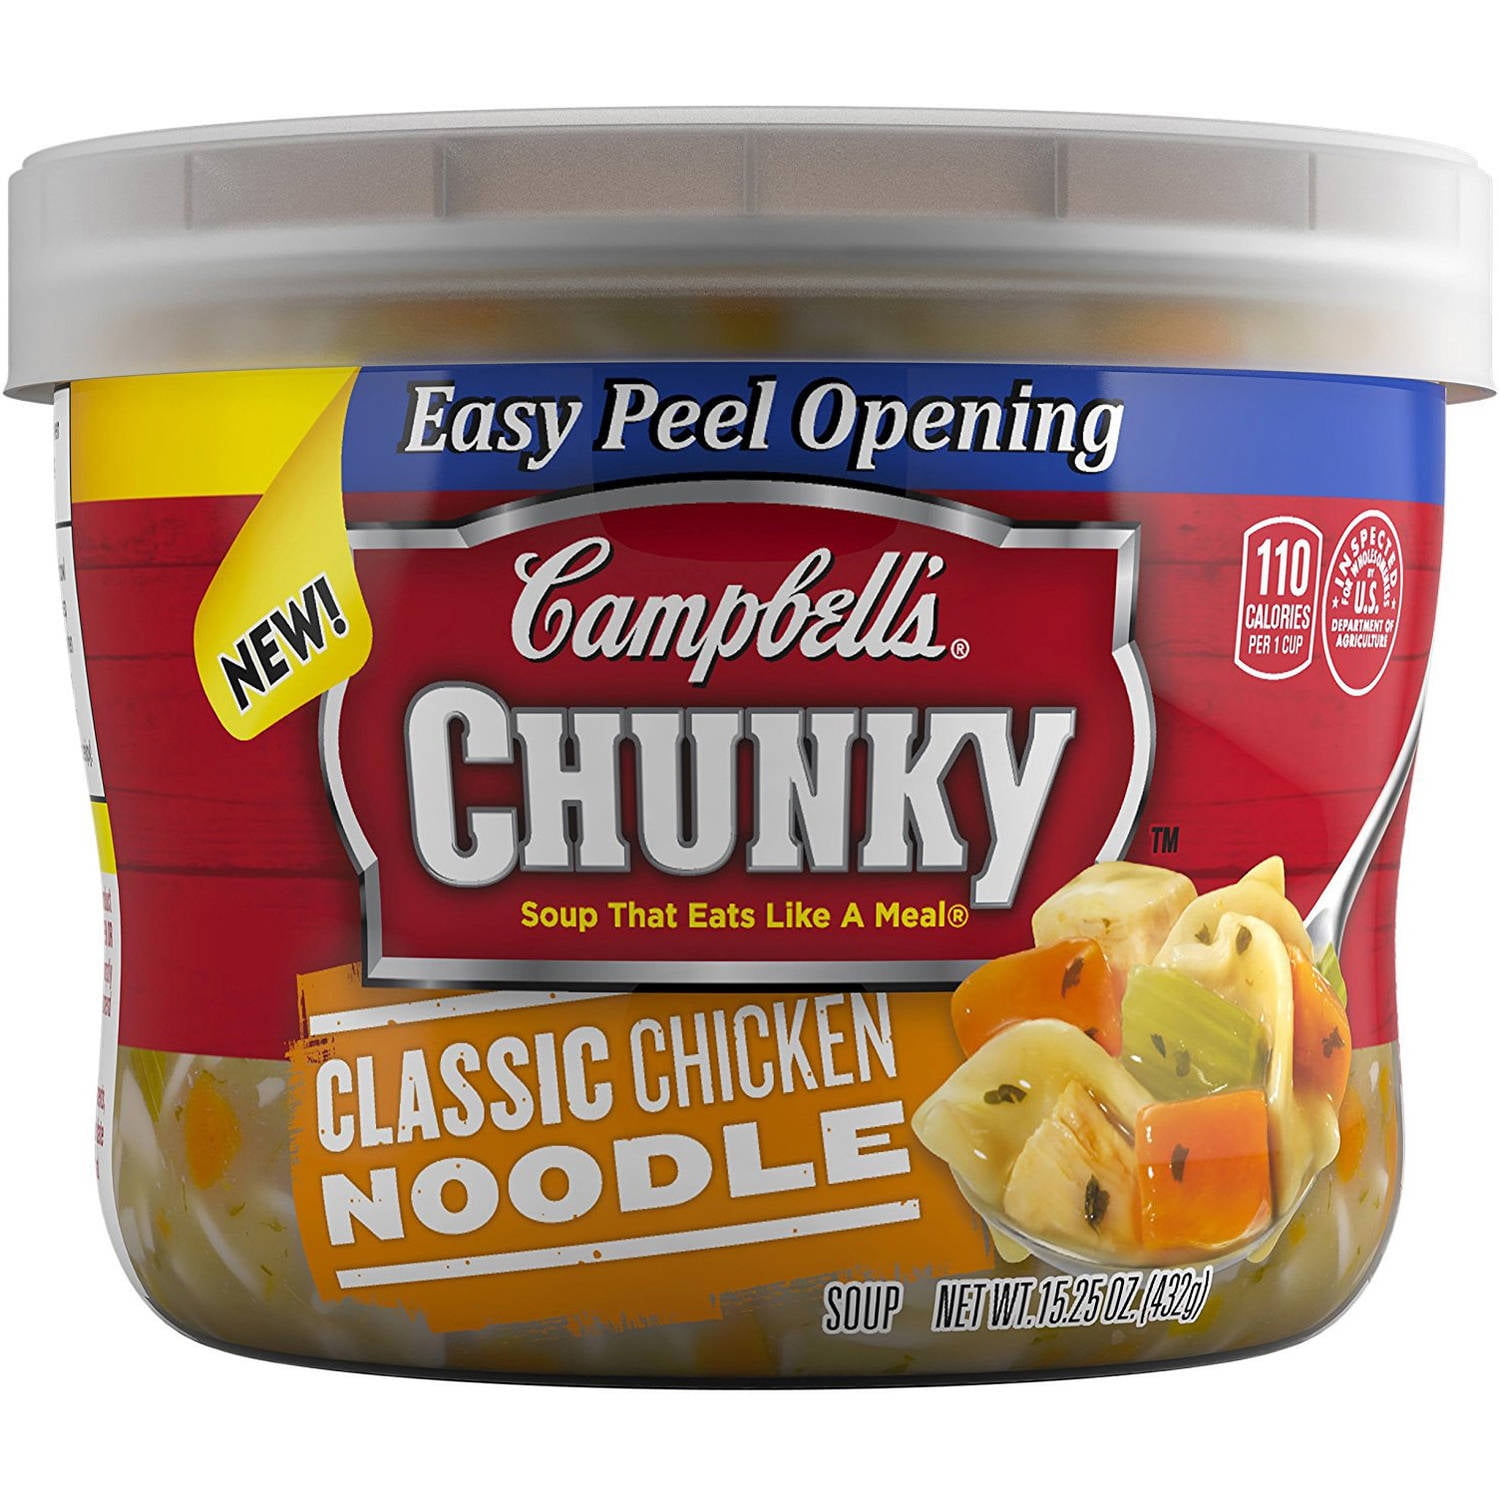 Campbell's Chunky Classic Chicken Noodle Soup Microwavable Bowl, 15.25 oz.